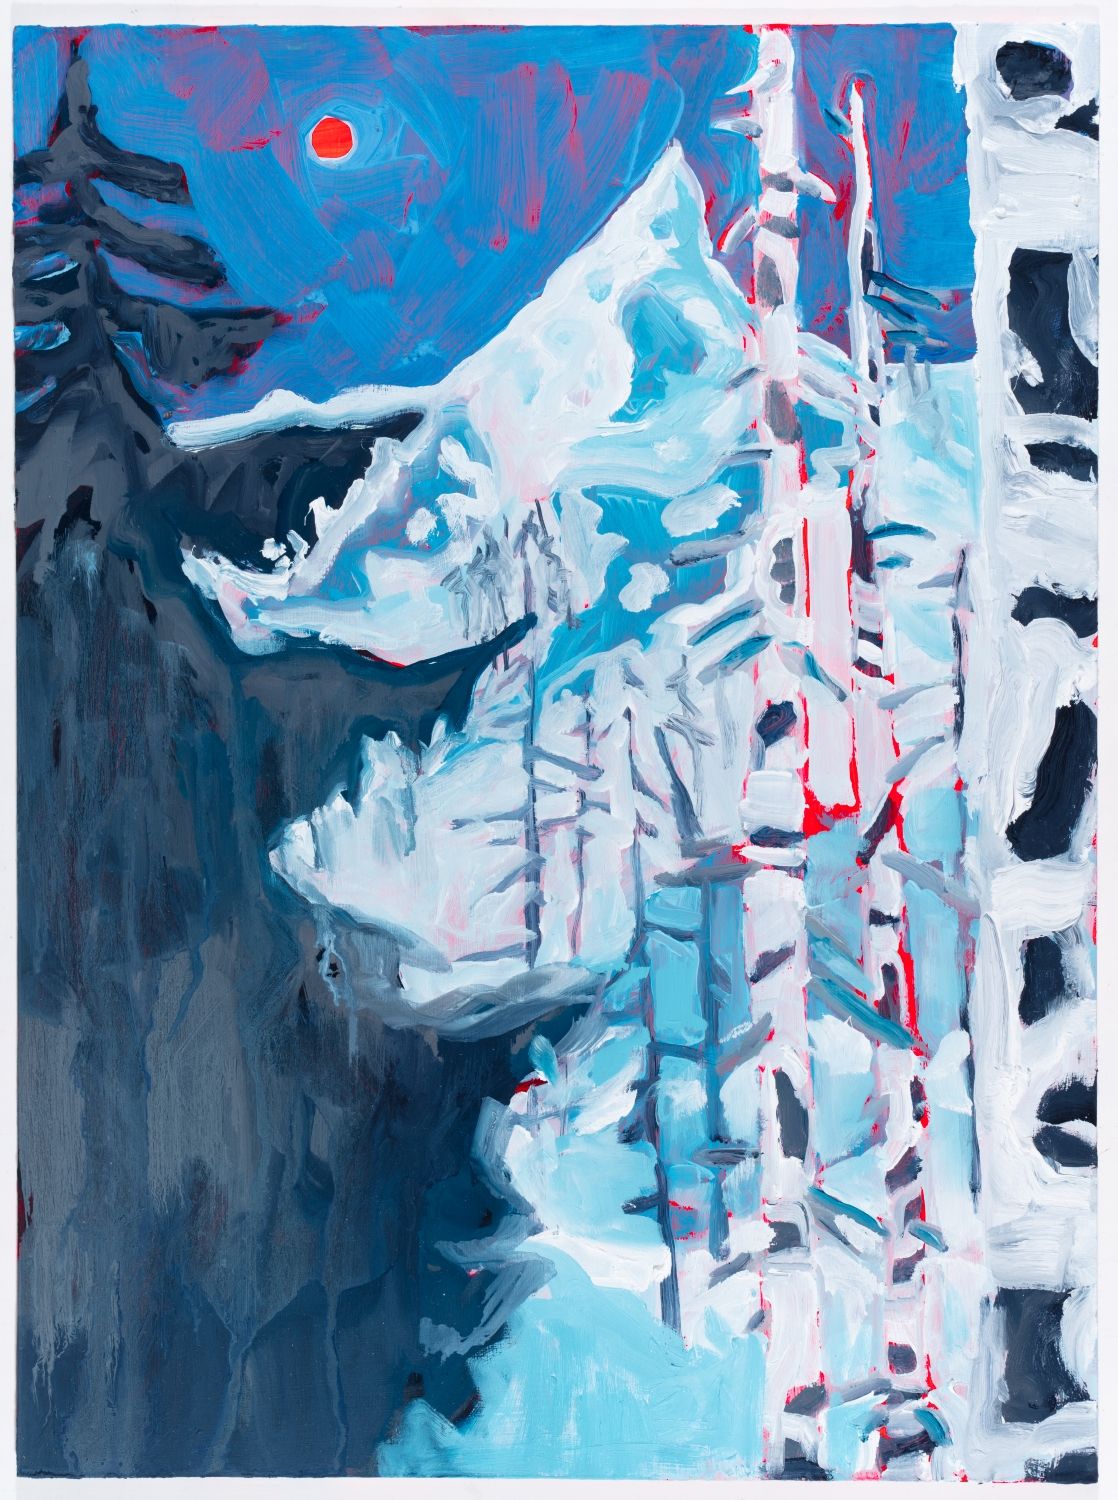 Danielle Winger, "The Great Silence of Snow" SOLD